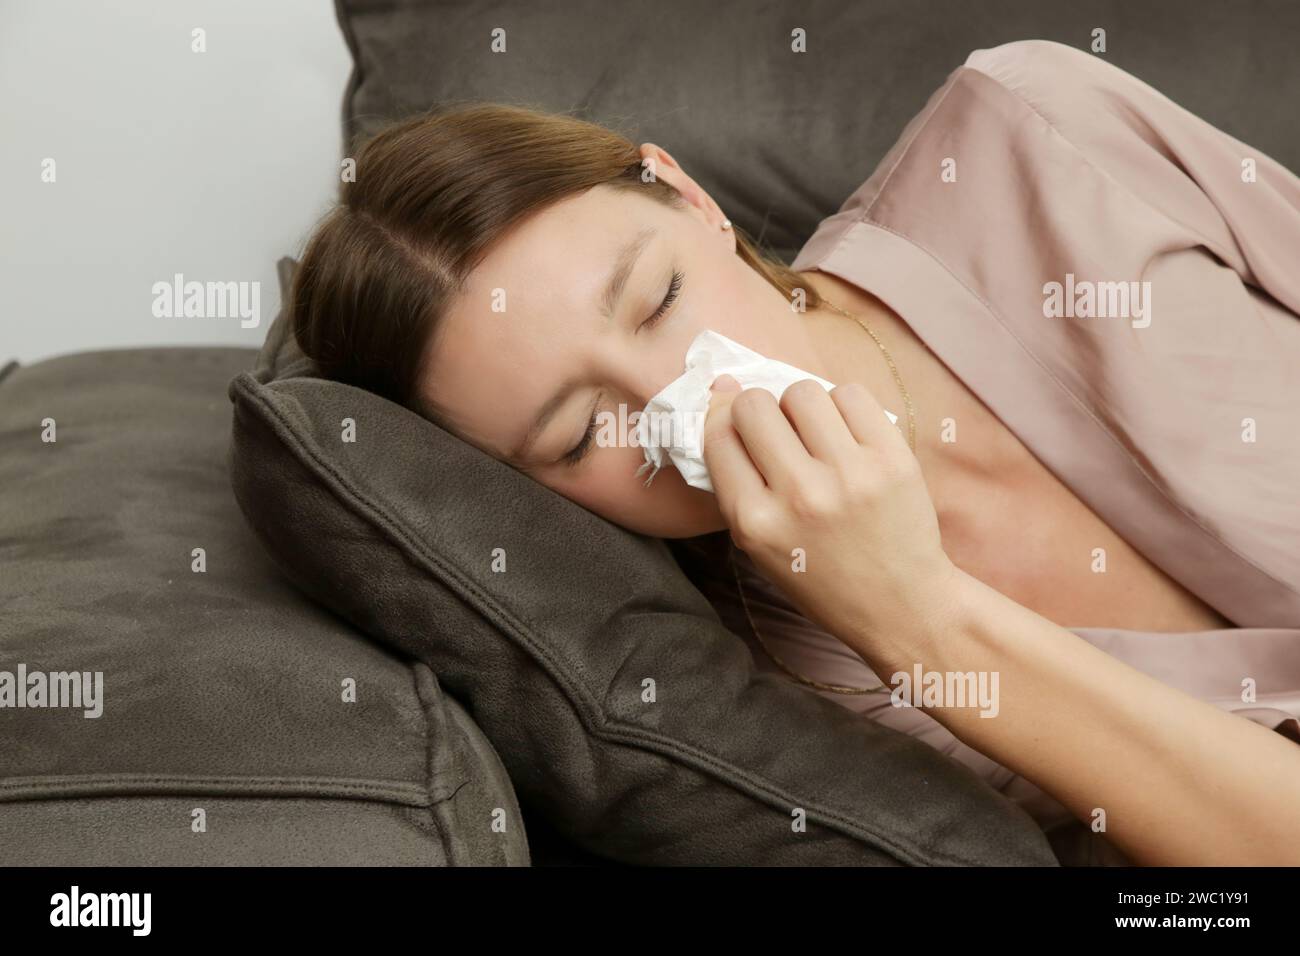 Young woman on the sofa blowing nose into a white paper tissue. Girl with allergy symptoms sneezing into a tissue. Flu, cold or allergy symptom Stock Photo